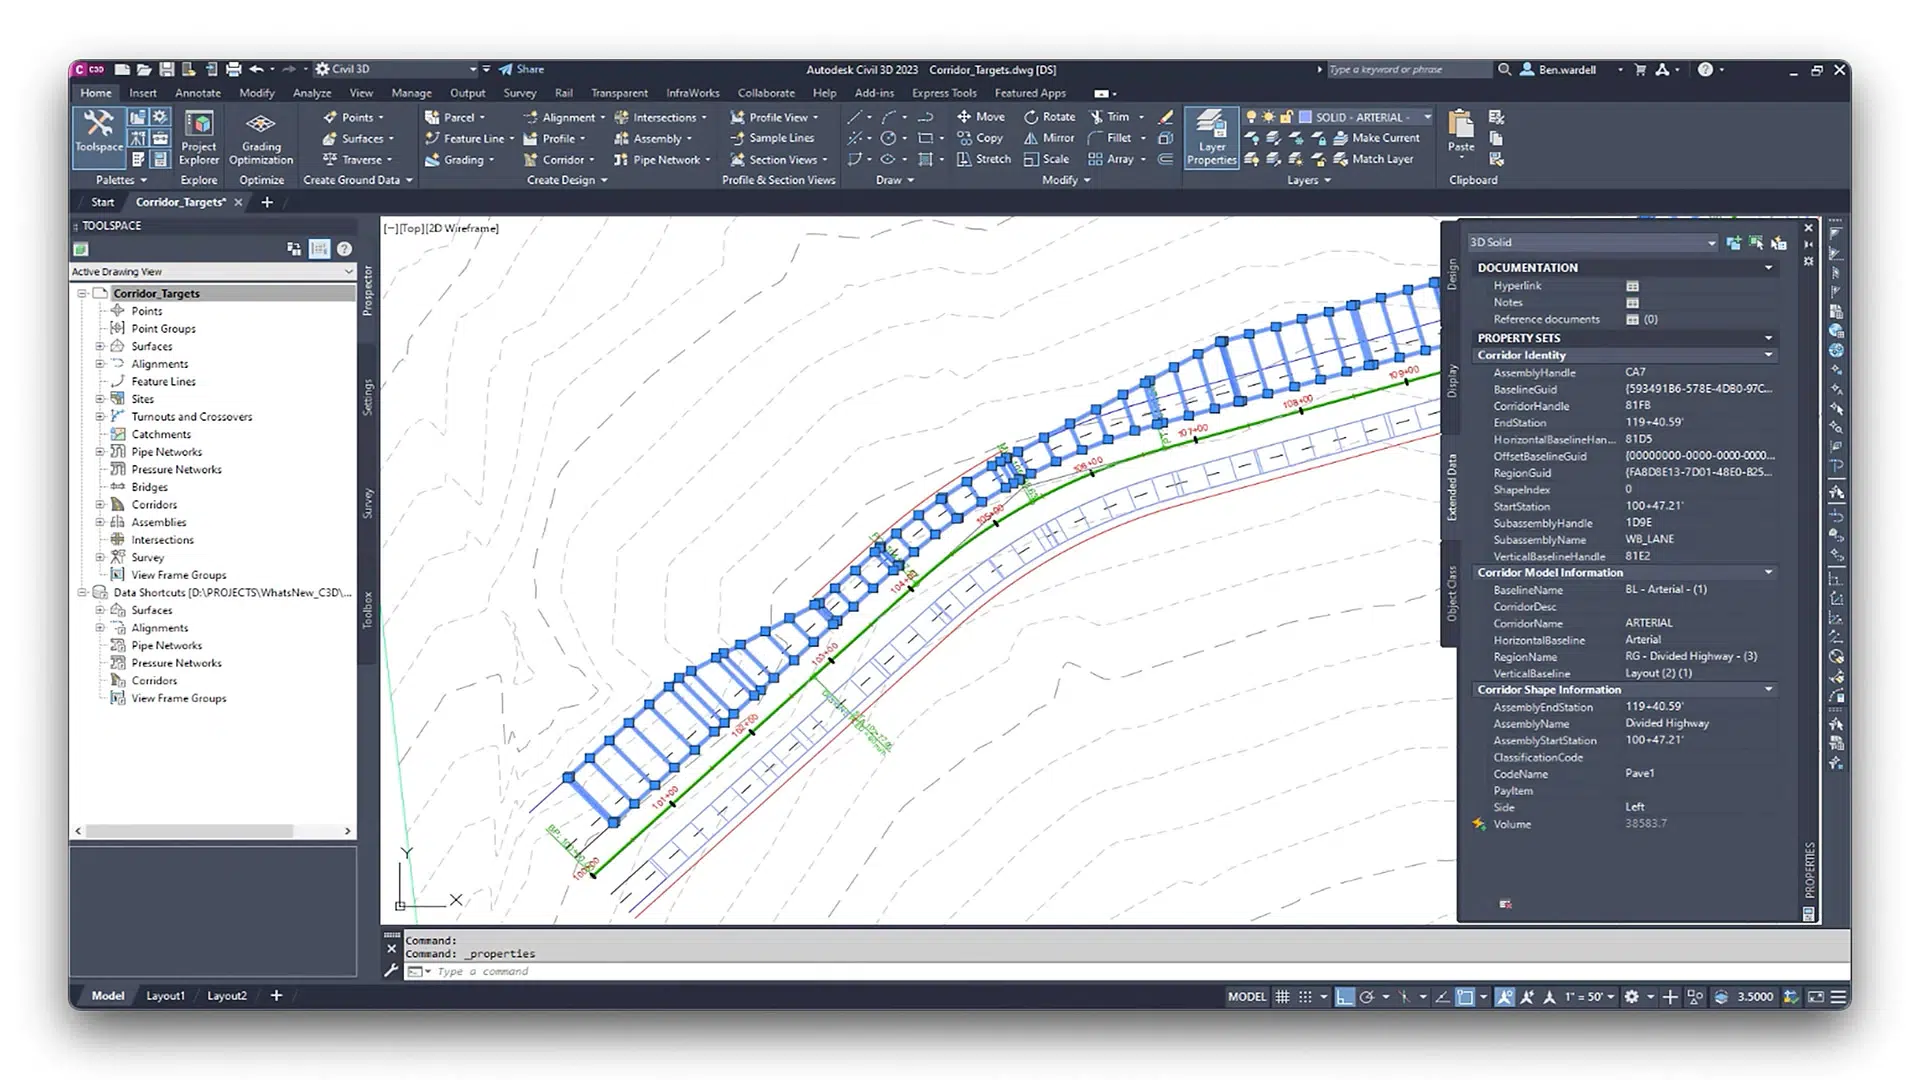 Quickly adapt to changes and streamline design processes - Autodesk Civil 3D